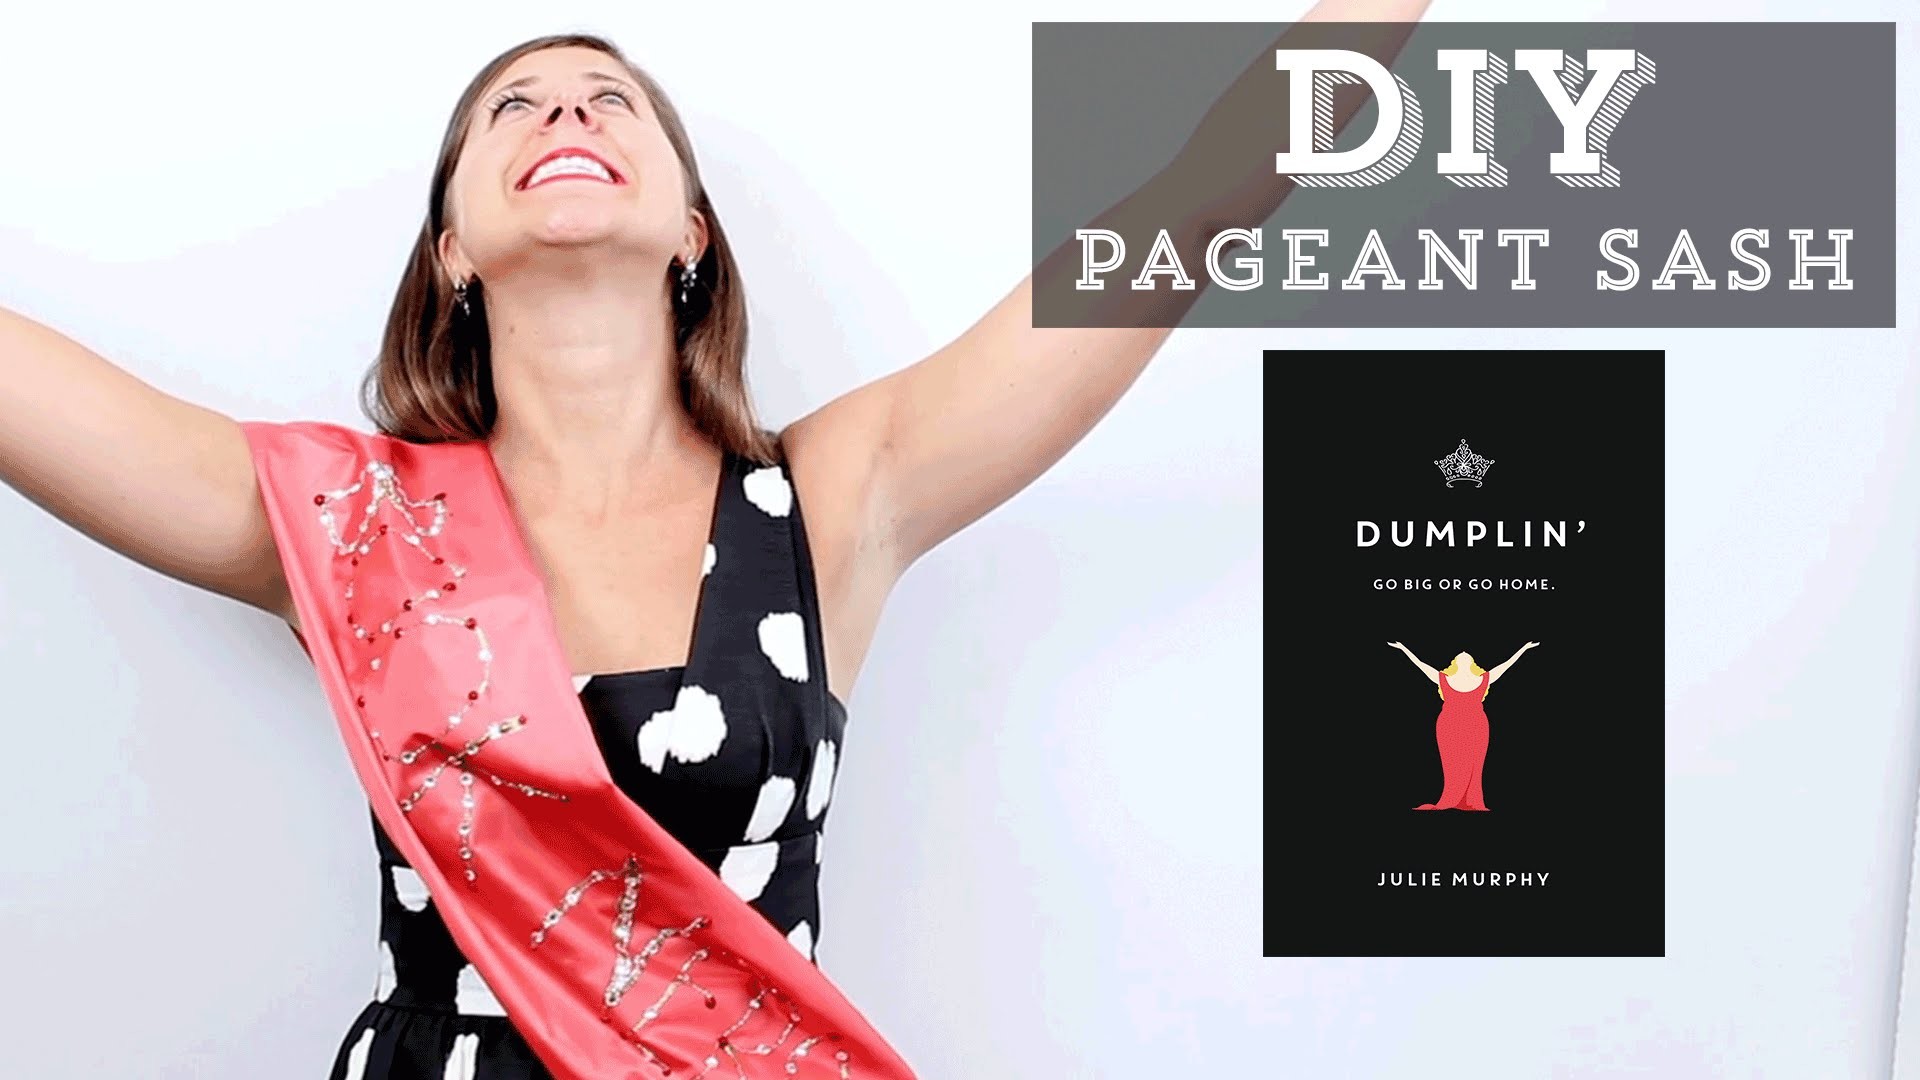 DIY: How to Make a Beauty Queen Pageant Sash Inspired by Dumplin’